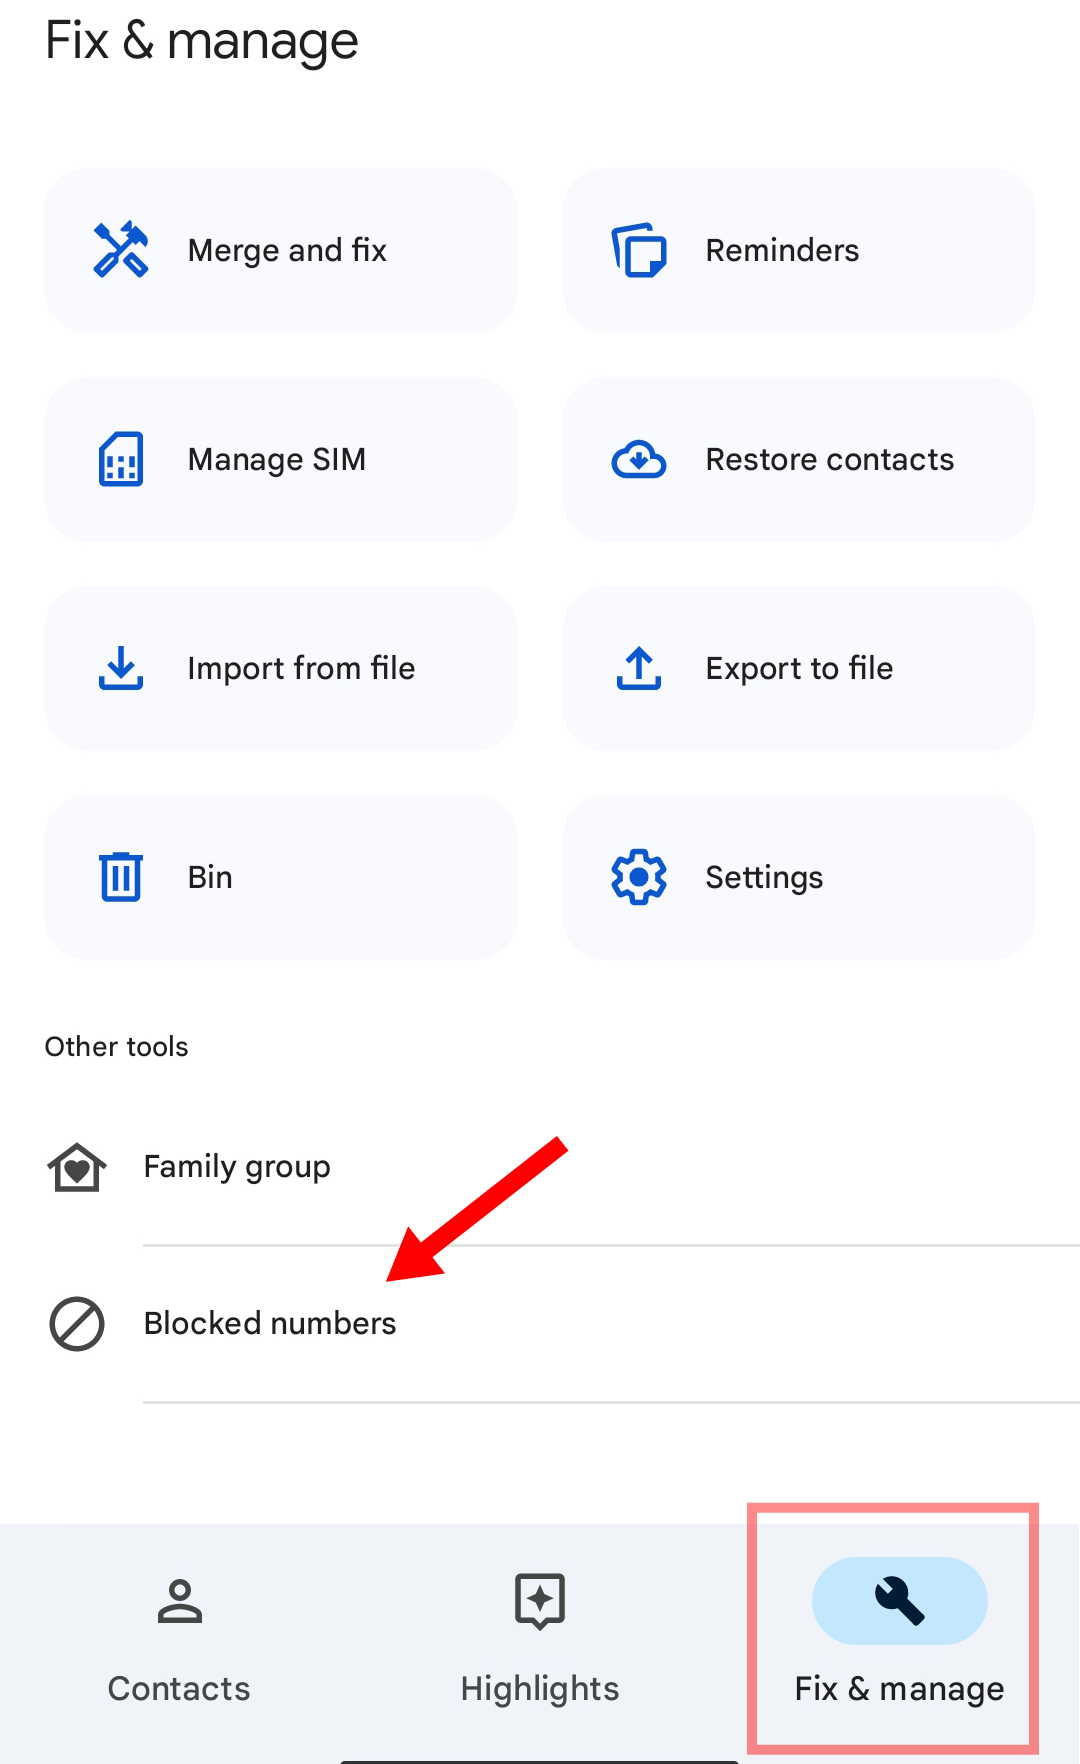 The Blocked numbers option in the Fix and manage tab in Google Contacts